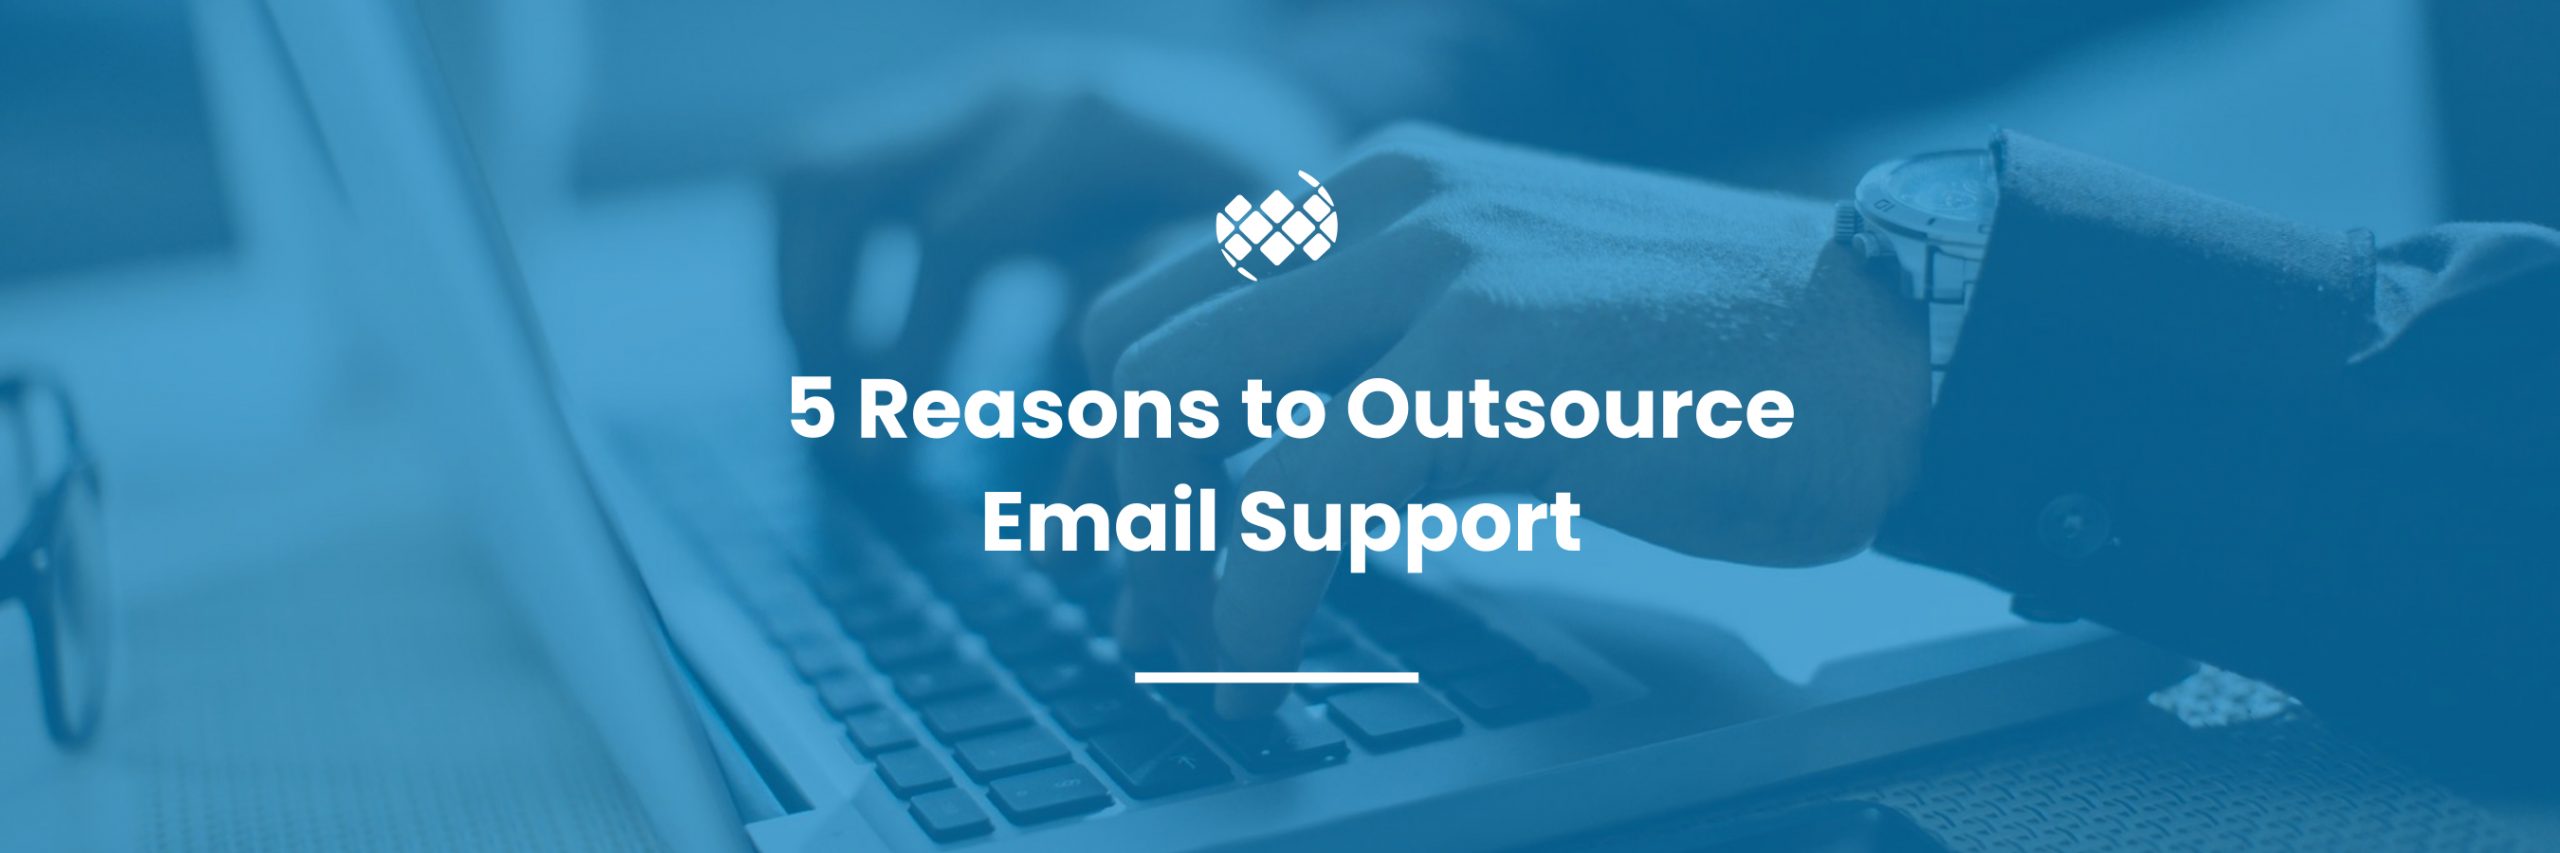 Email support outsourcing